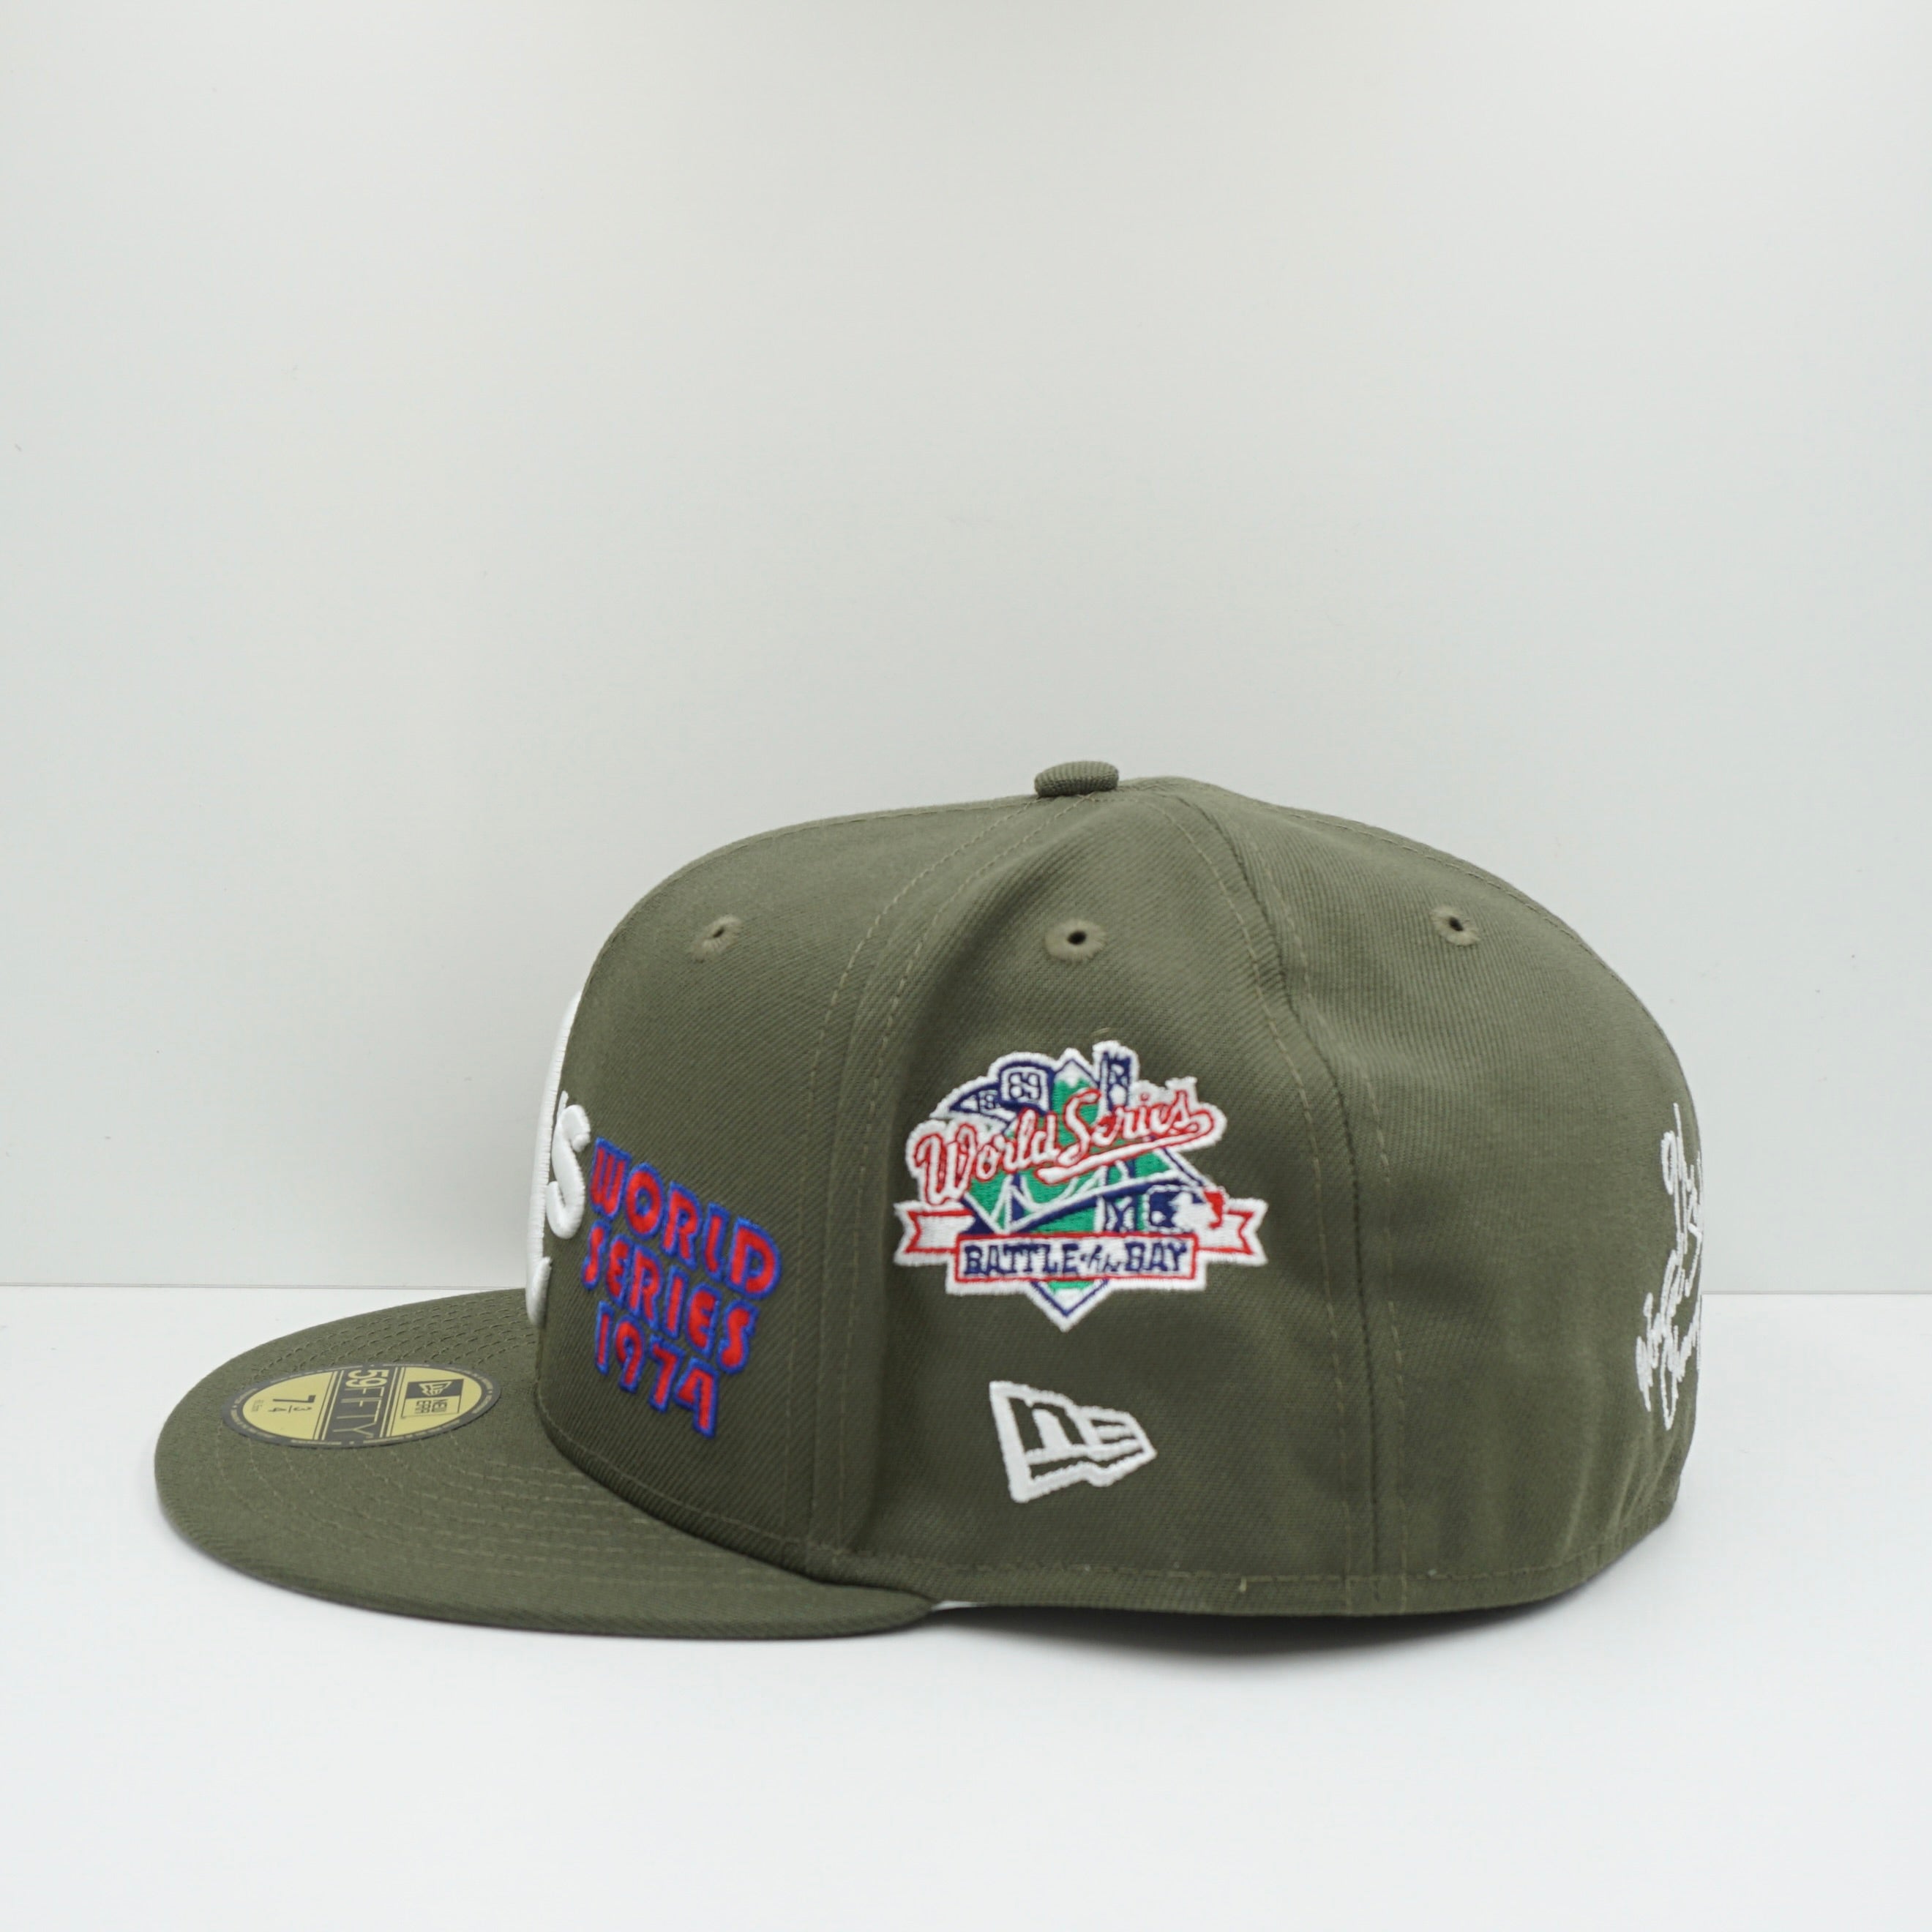 New Era Oakland A's World Series Multi Logo Fitted Cap